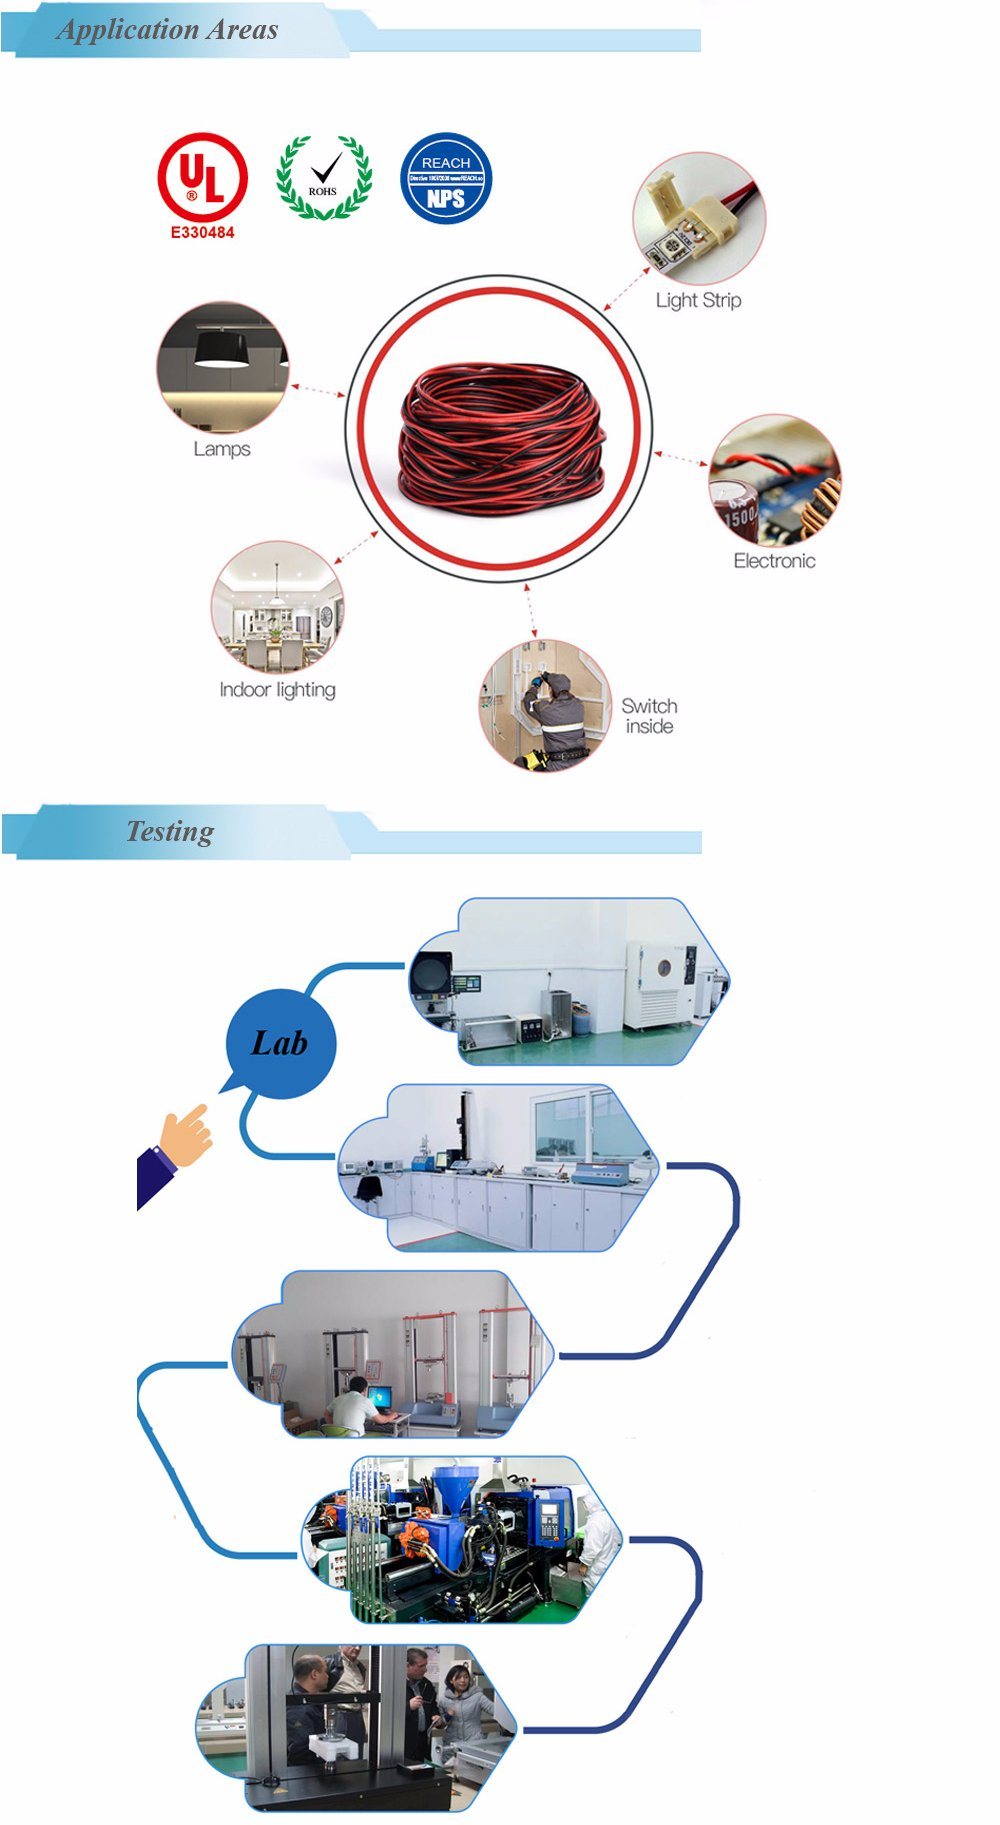 UL, Solid or Stranded, Free Samples High Quality Xlpvc Insulation Wire, Flexible Power Cords, UL1429 Wire